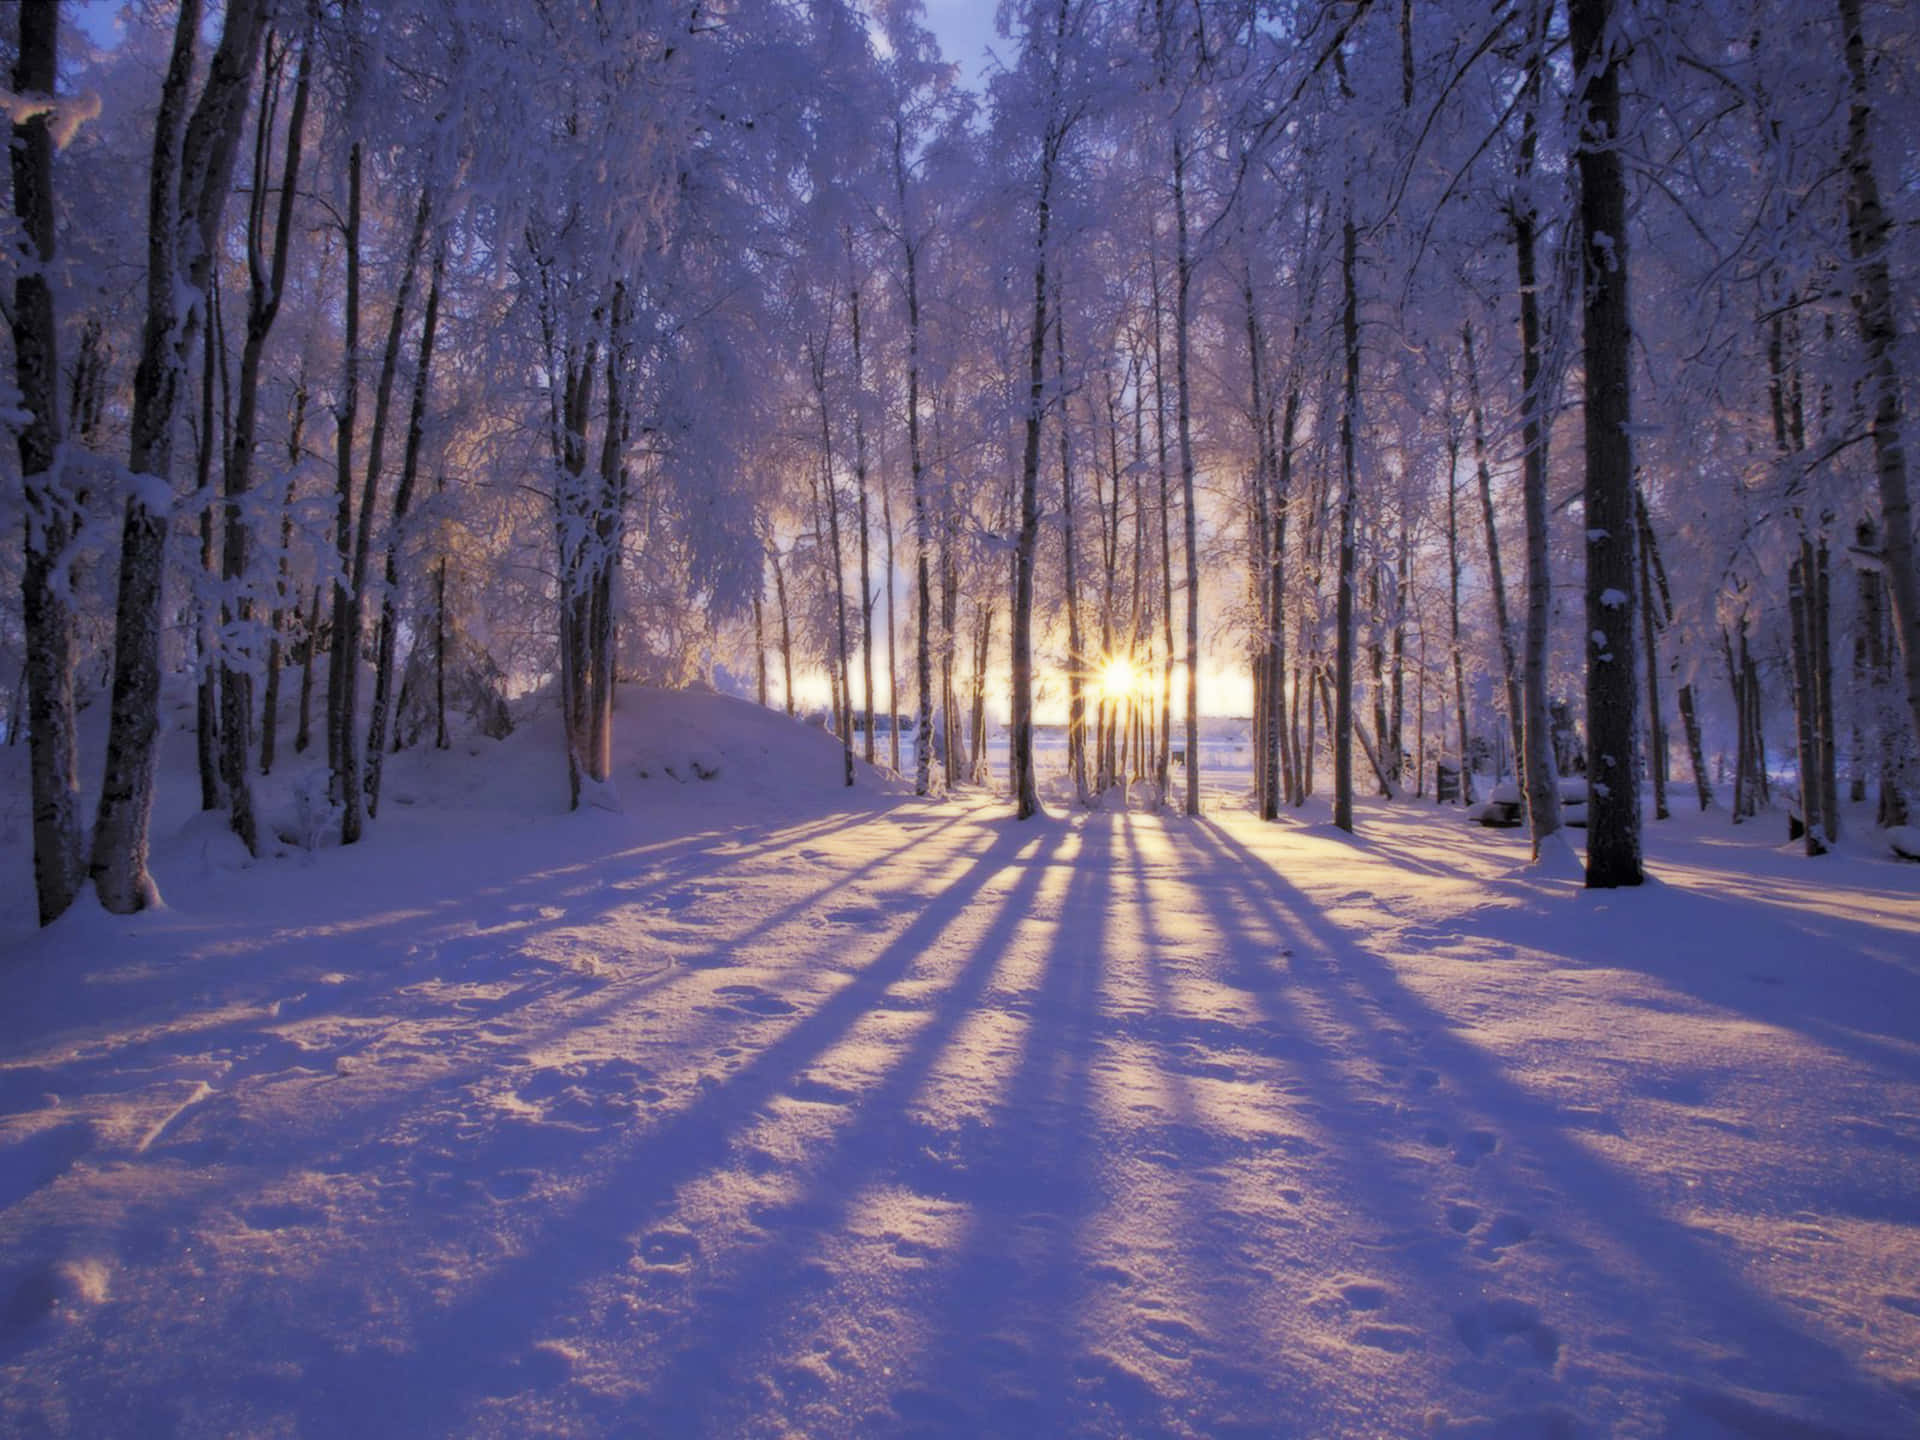 Enjoy the beauty of winter with this tranquil landscape